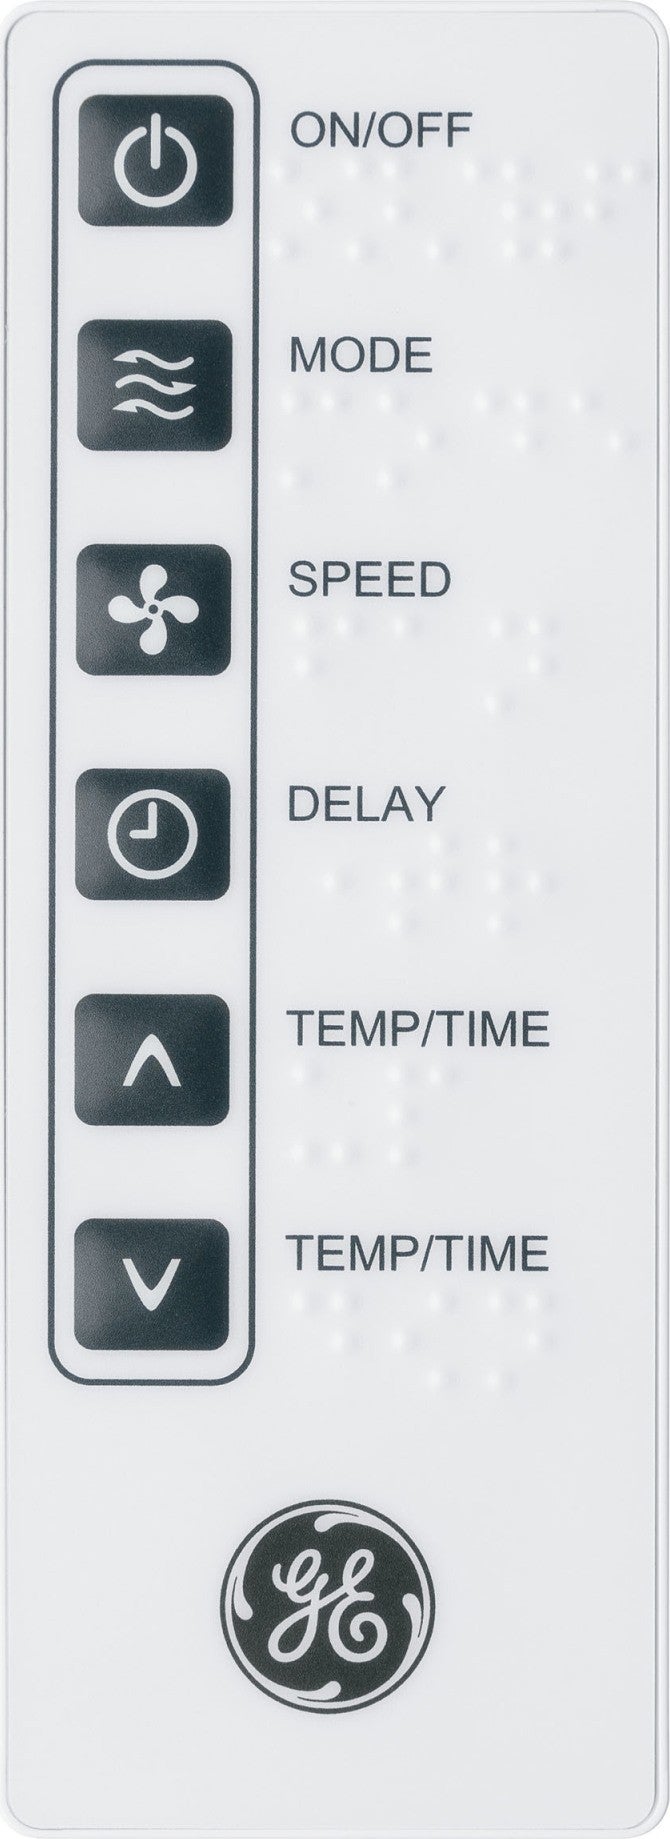 Programmable 24-hour Timer